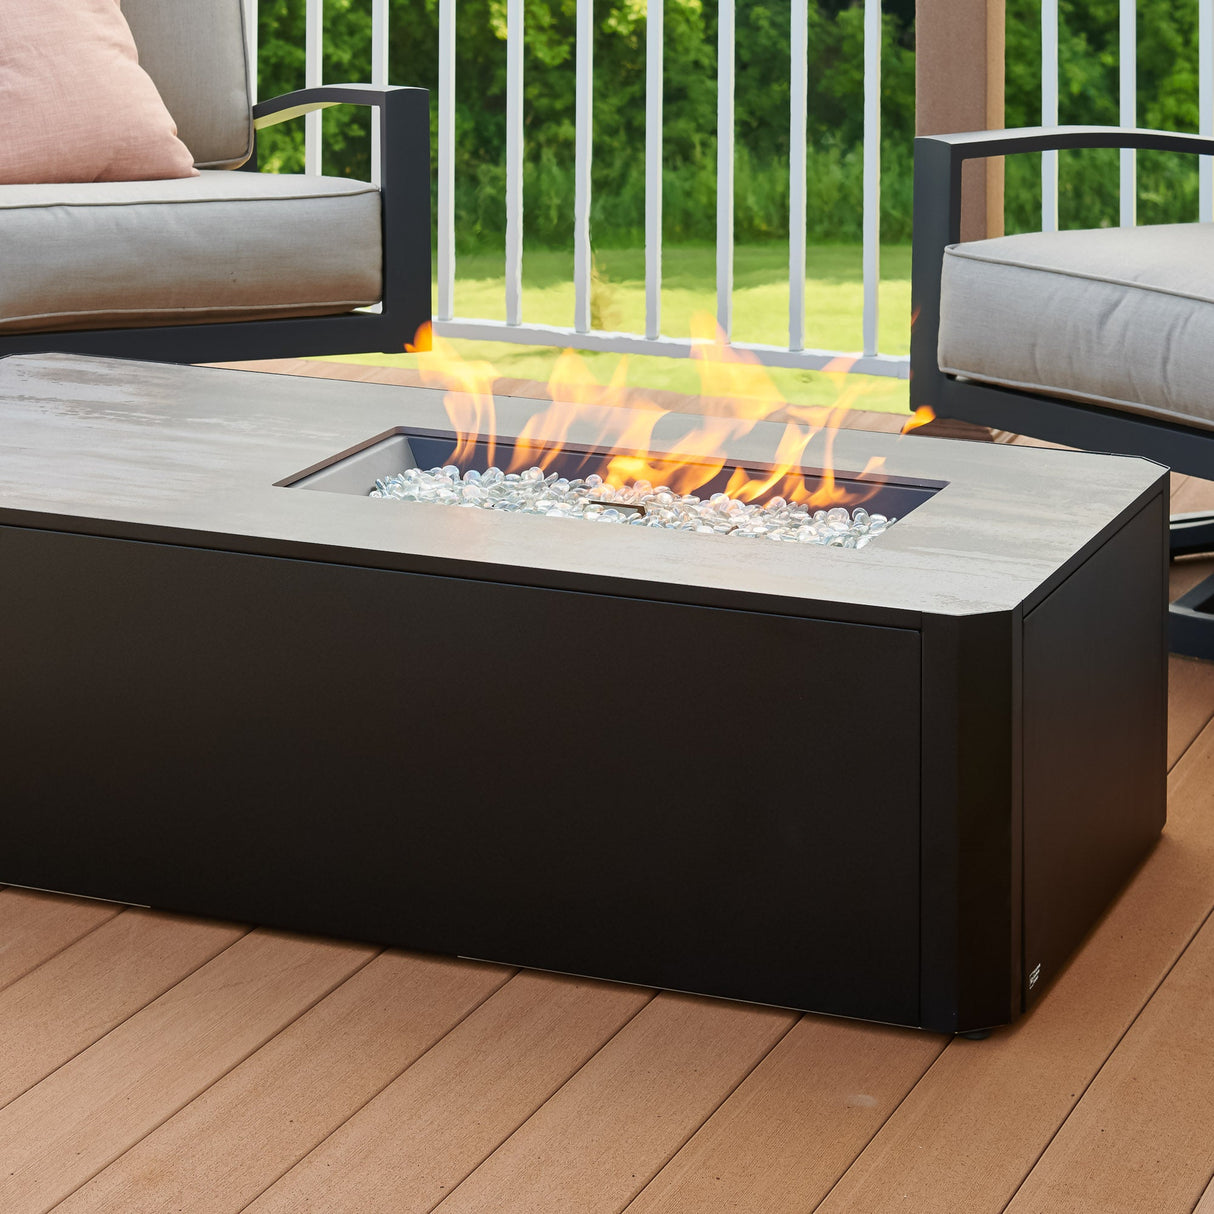 Close up of the flame coming from the Kinney Rectangular Gas Fire Pit Table in an outdoor setting